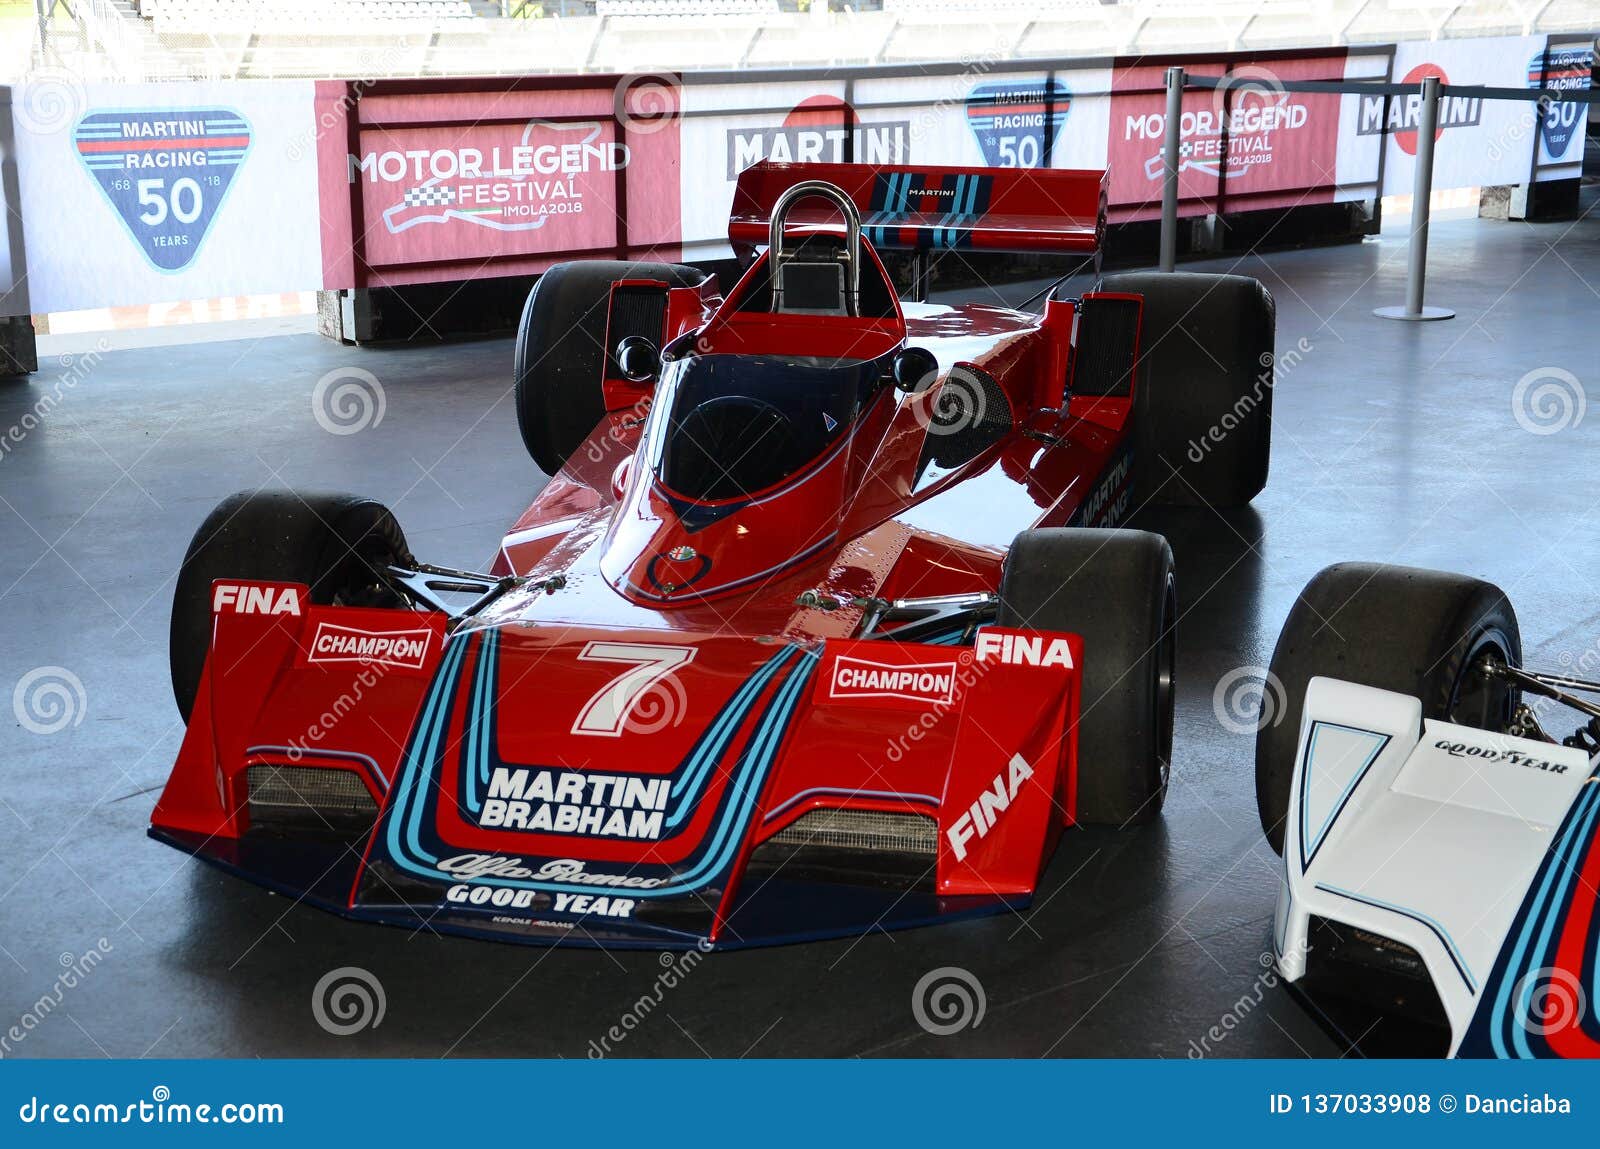 21 April 2018: Historic F1 Cars Brabham BT45 Sponsorized by Martini Racing  Exposed at Motor Legend Festival 2018 at Imola Editorial Stock Photo -  Image of glass, cocktail: 137033908